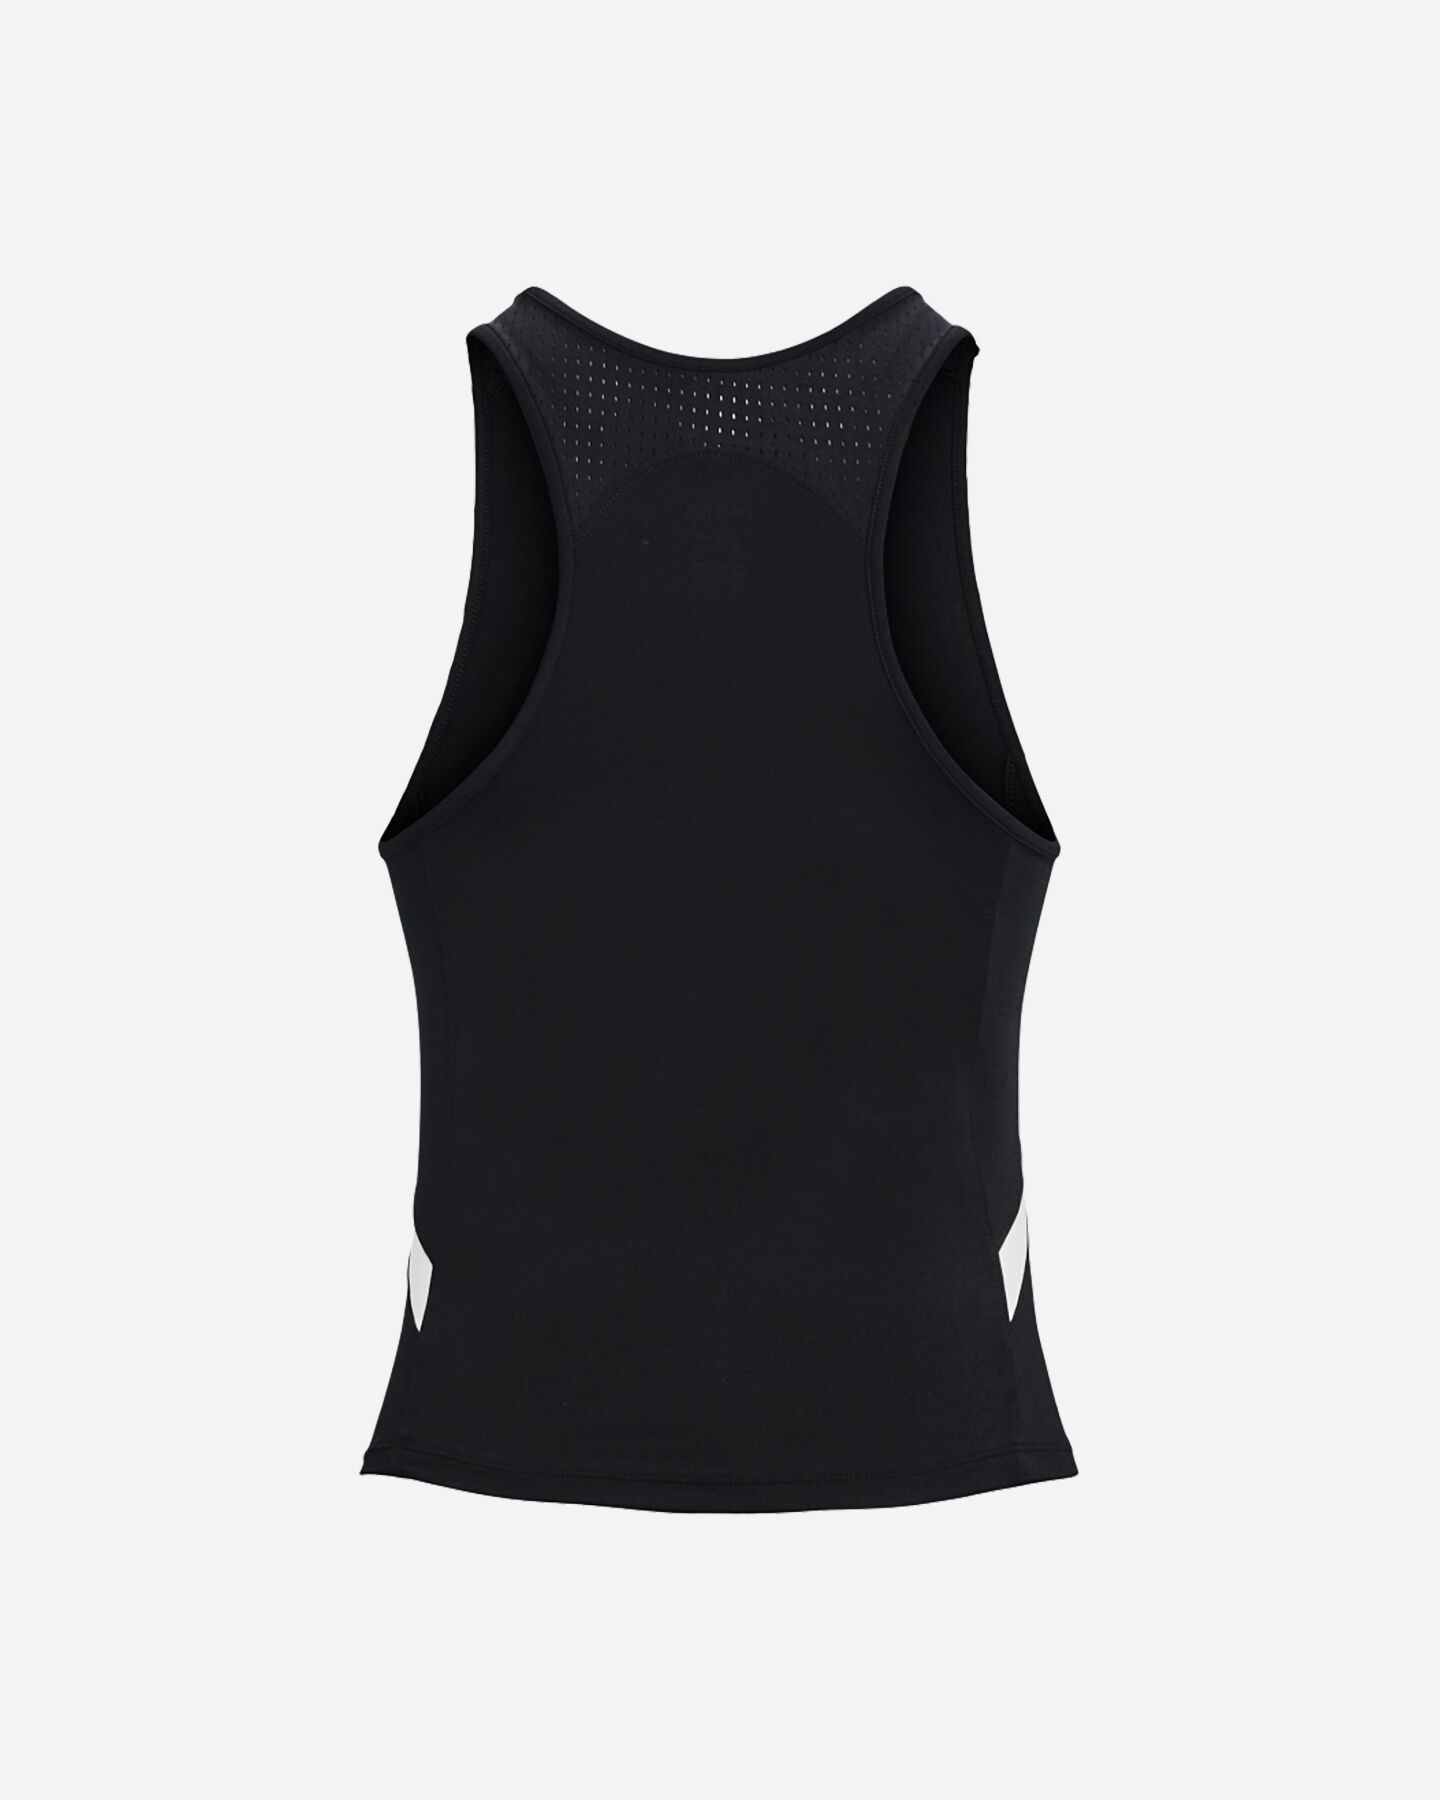  Canotta training UNDER ARMOUR ARMOUR MESH W S5459389|0001|XS scatto 1